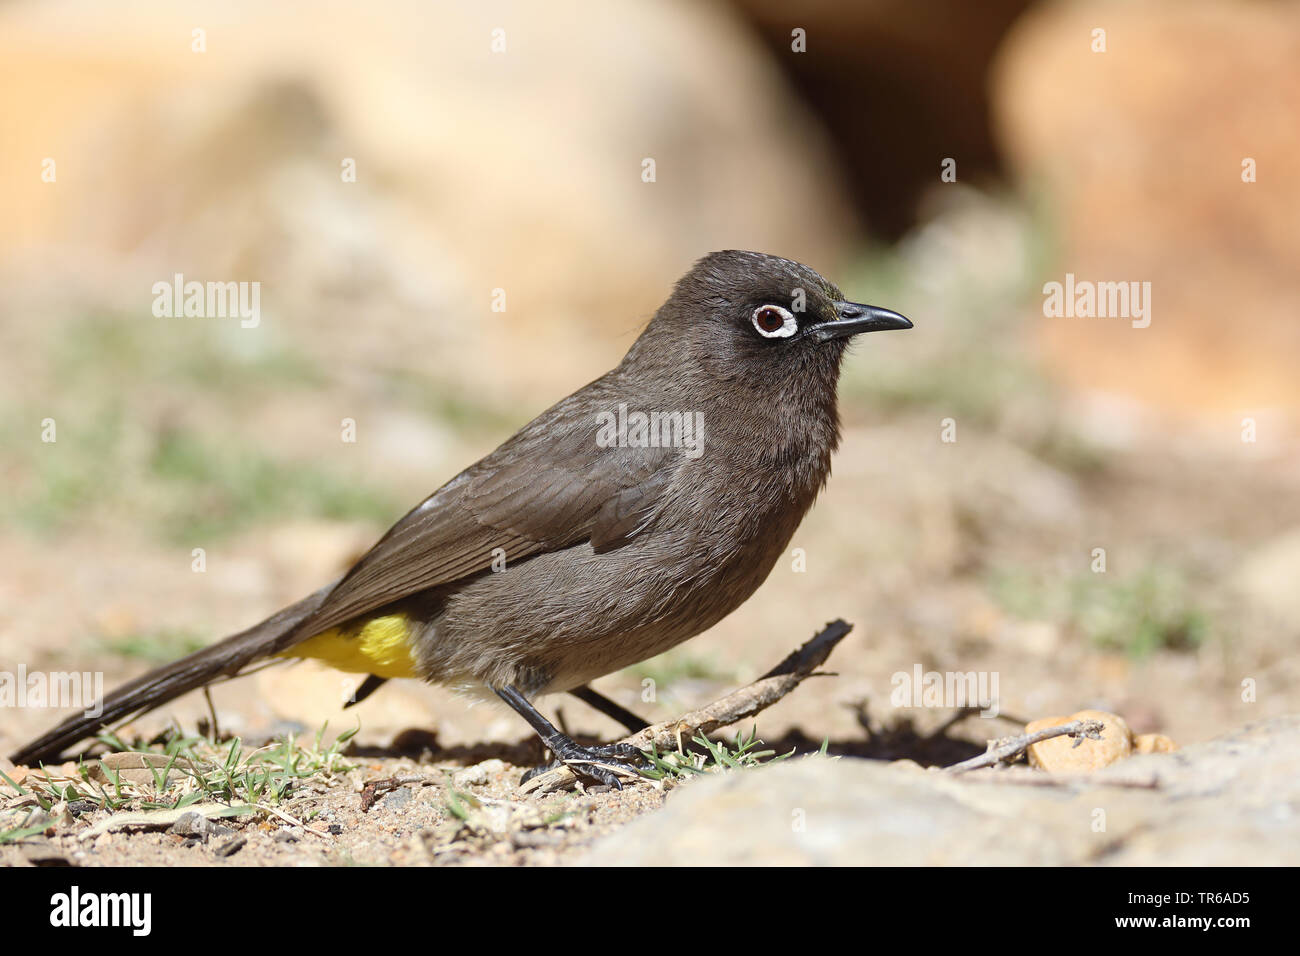 Cape bulbul (Pycnonotus capensis), sitting on the ground, South Africa, Klaarstrom Stock Photo